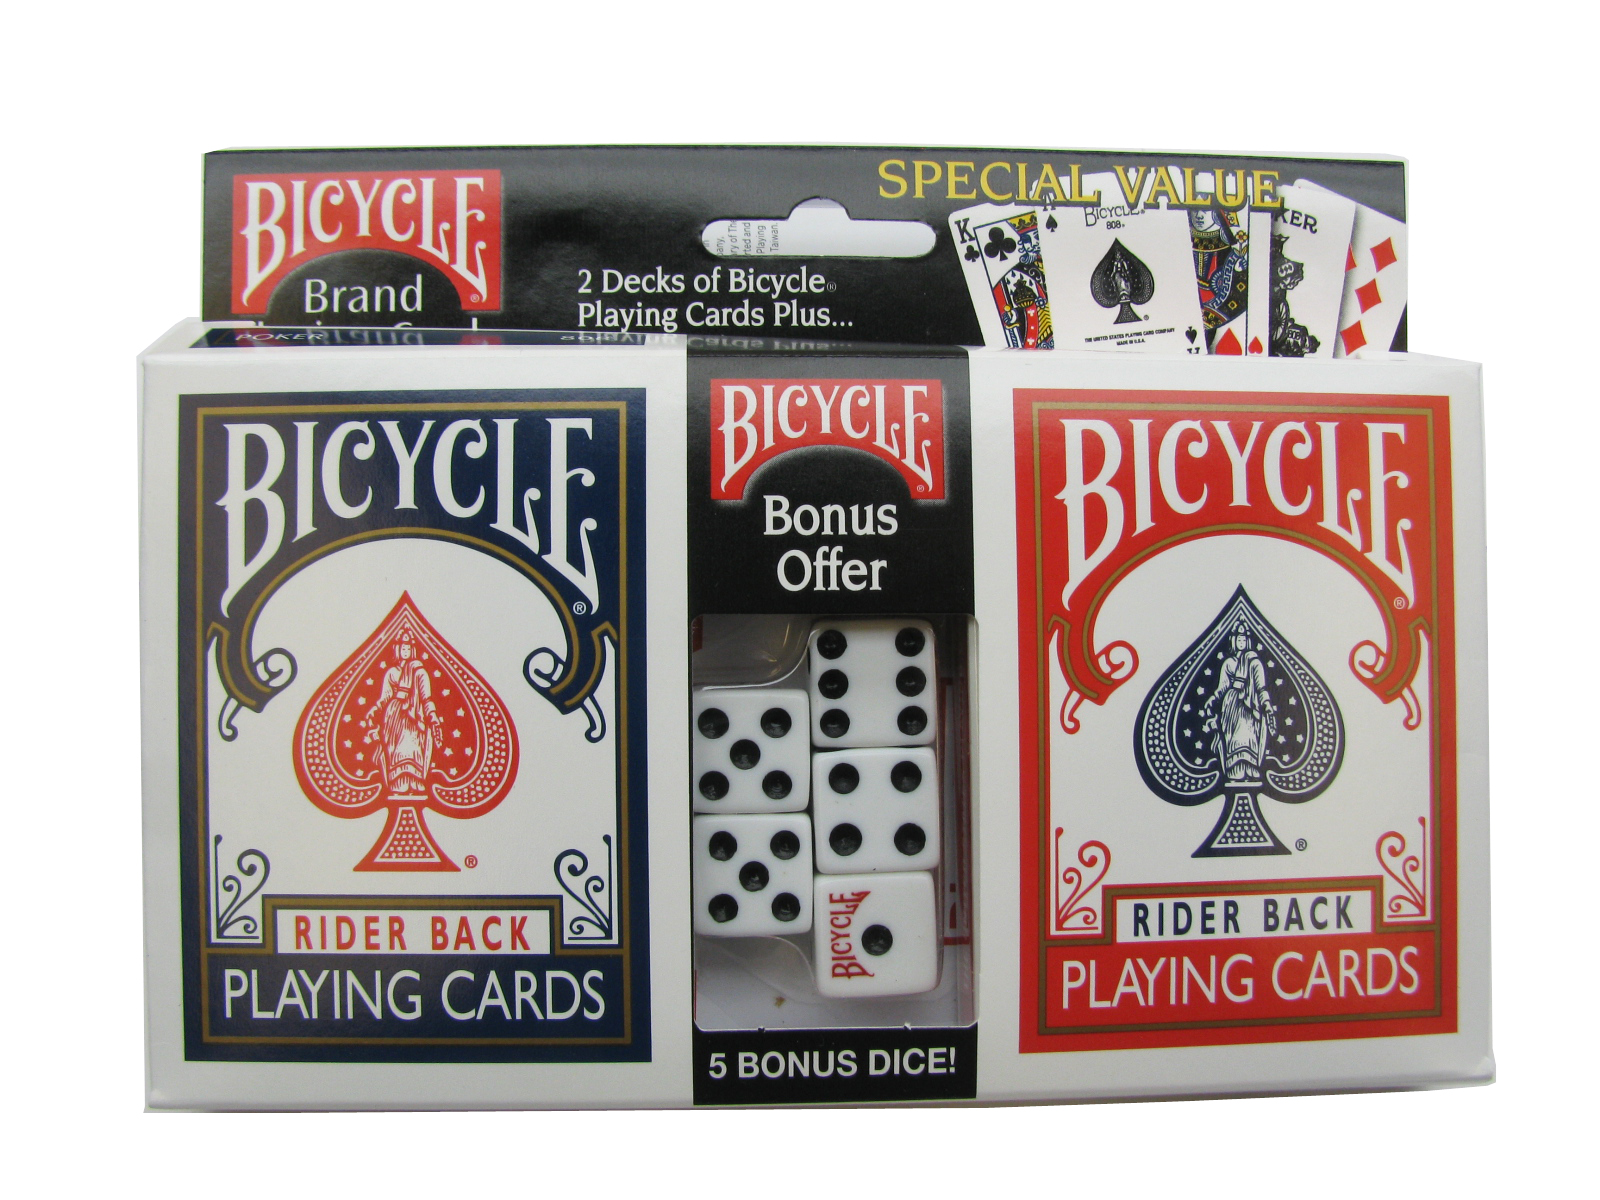 Bicycle Playing Cards - 1600x1200 Wallpaper 